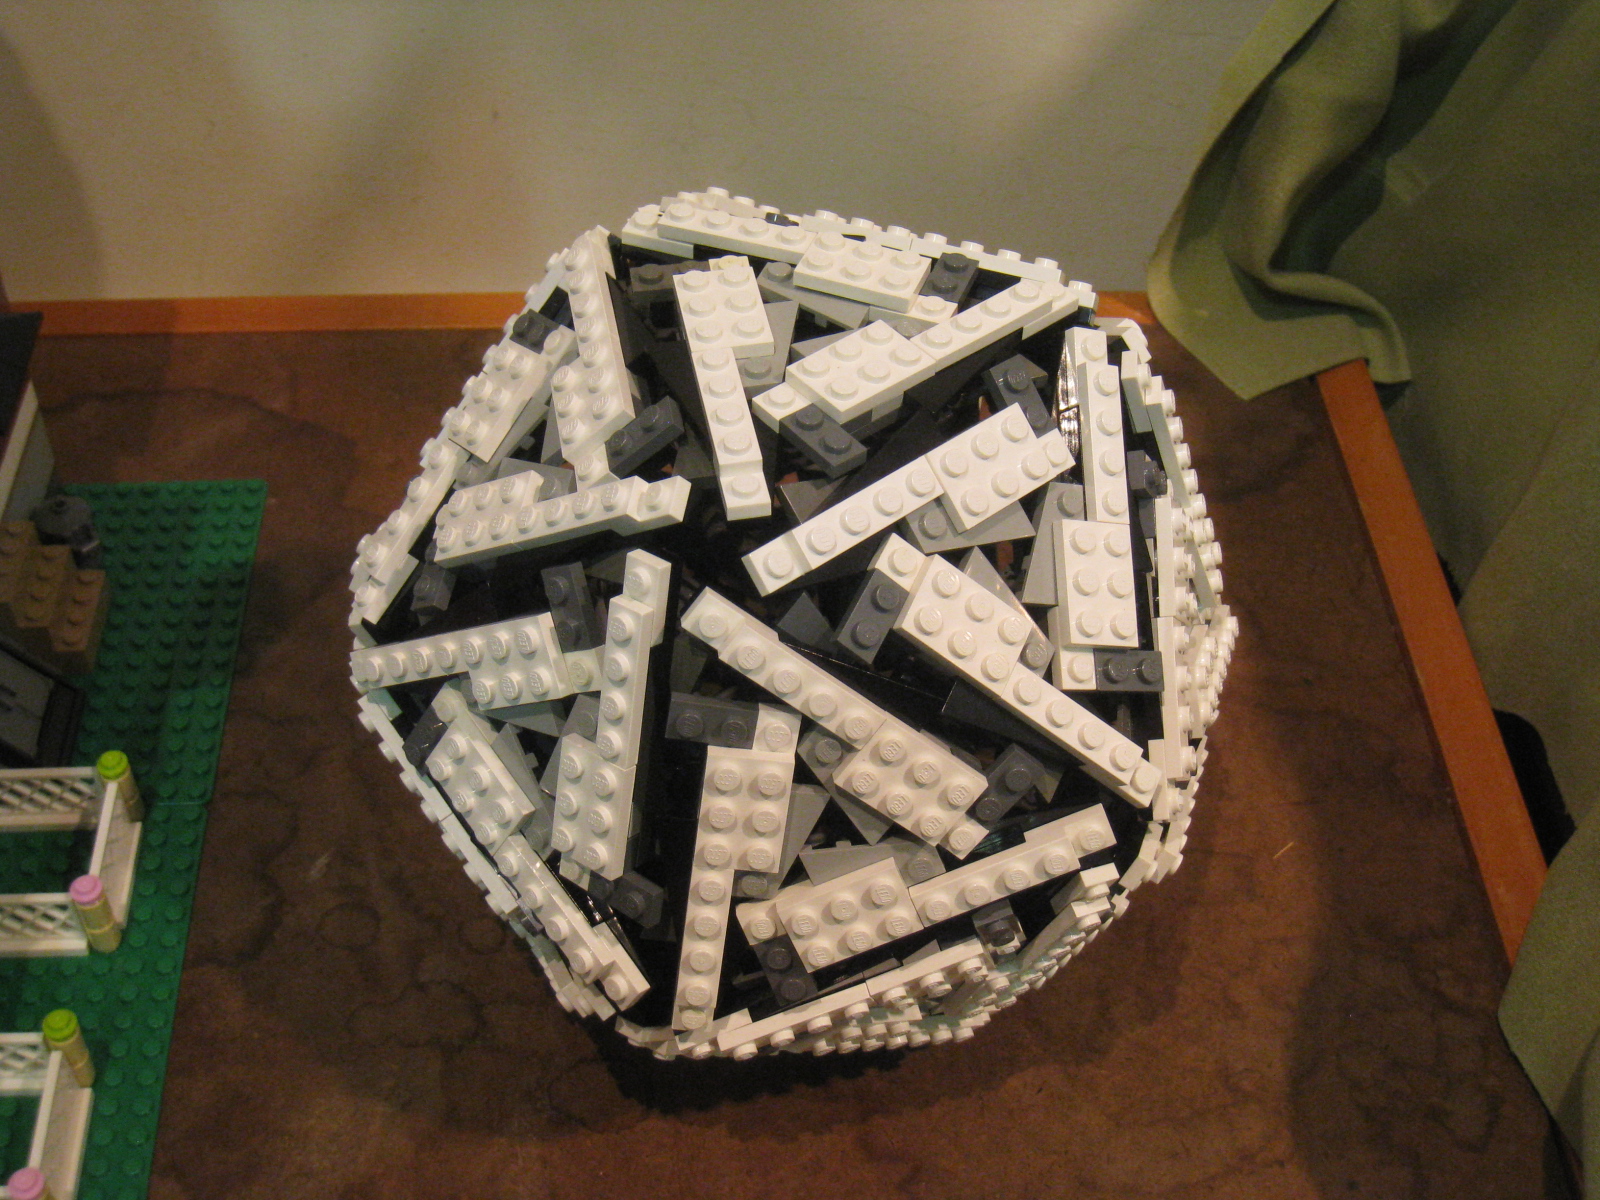 A mostly-spherical shape constructed from Lego parts.